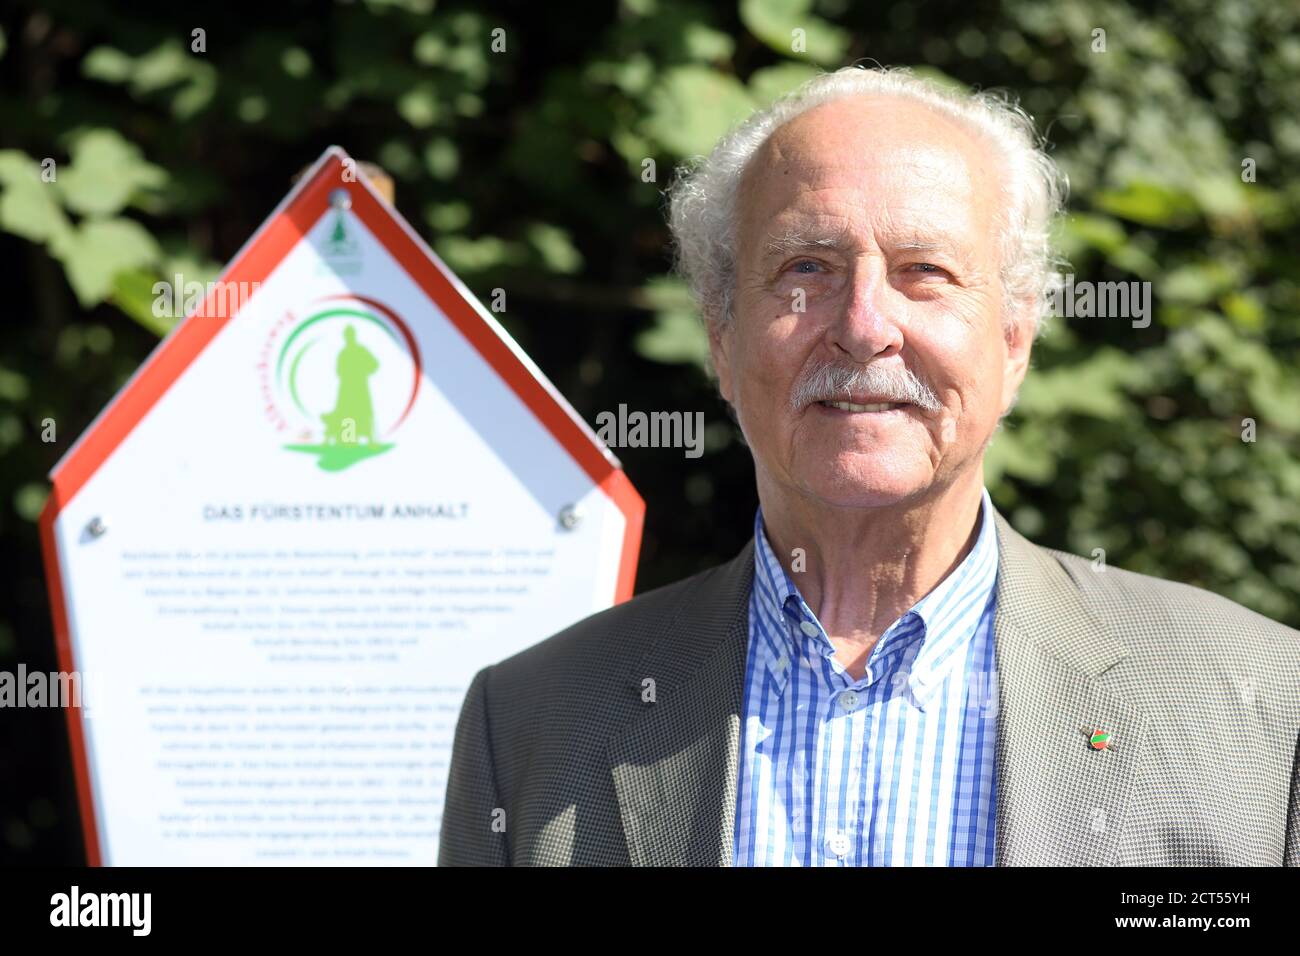 Ballenstedt, Germany. 20th Sep, 2020. Eduard Prinz von Anhalt takes part in the opening of the Albrechtsweg hiking trail in the Selke valley near Ballenstedt in the Harz Mountains. The 17 kilometre long Albrechtsweg, named after Prince Albrecht, connects Ballenstedt Castle with Anhalt Castle in the Selke Valley. Albrecht the Bear (around 1100 to 1170) is considered the founder of the Principality of Anhalt and the Mark Brandenburg. Credit: Matthias Bein/dpa-Zentralbild/ZB/dpa/Alamy Live News Stock Photo